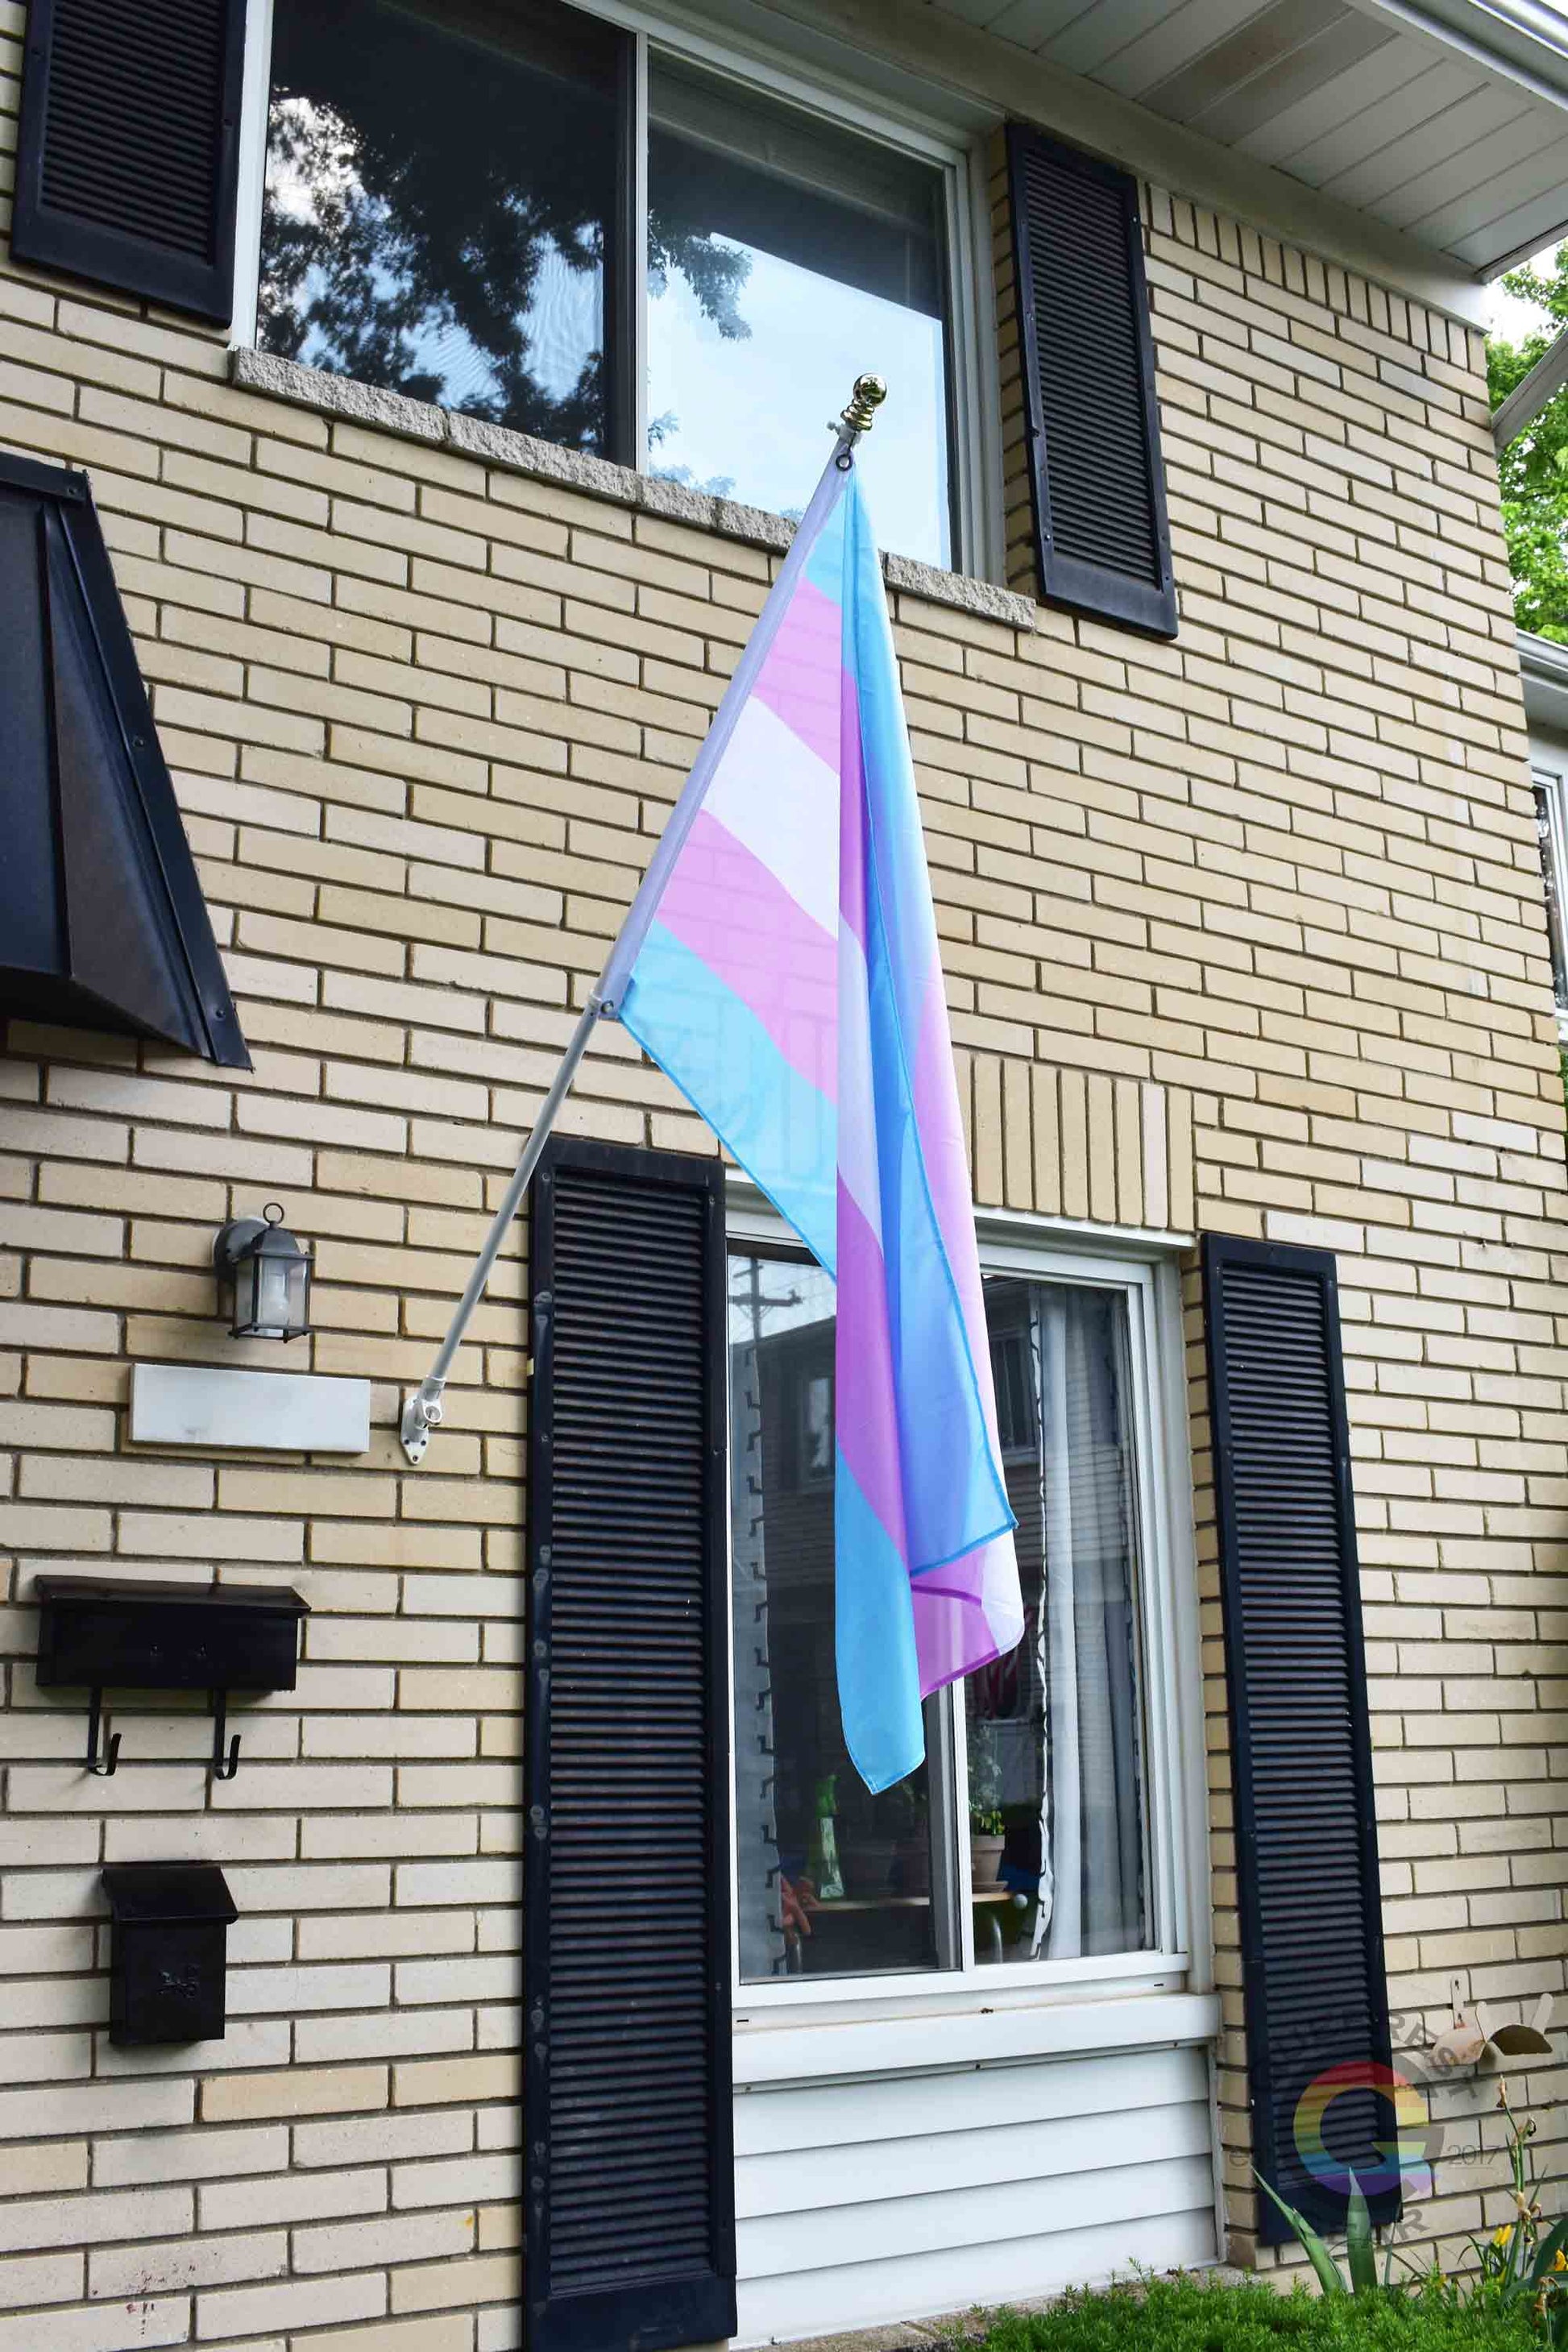 3’x5’ transgender pride flag hanging from a flagpole on the outside of a light brick house with dark shutters